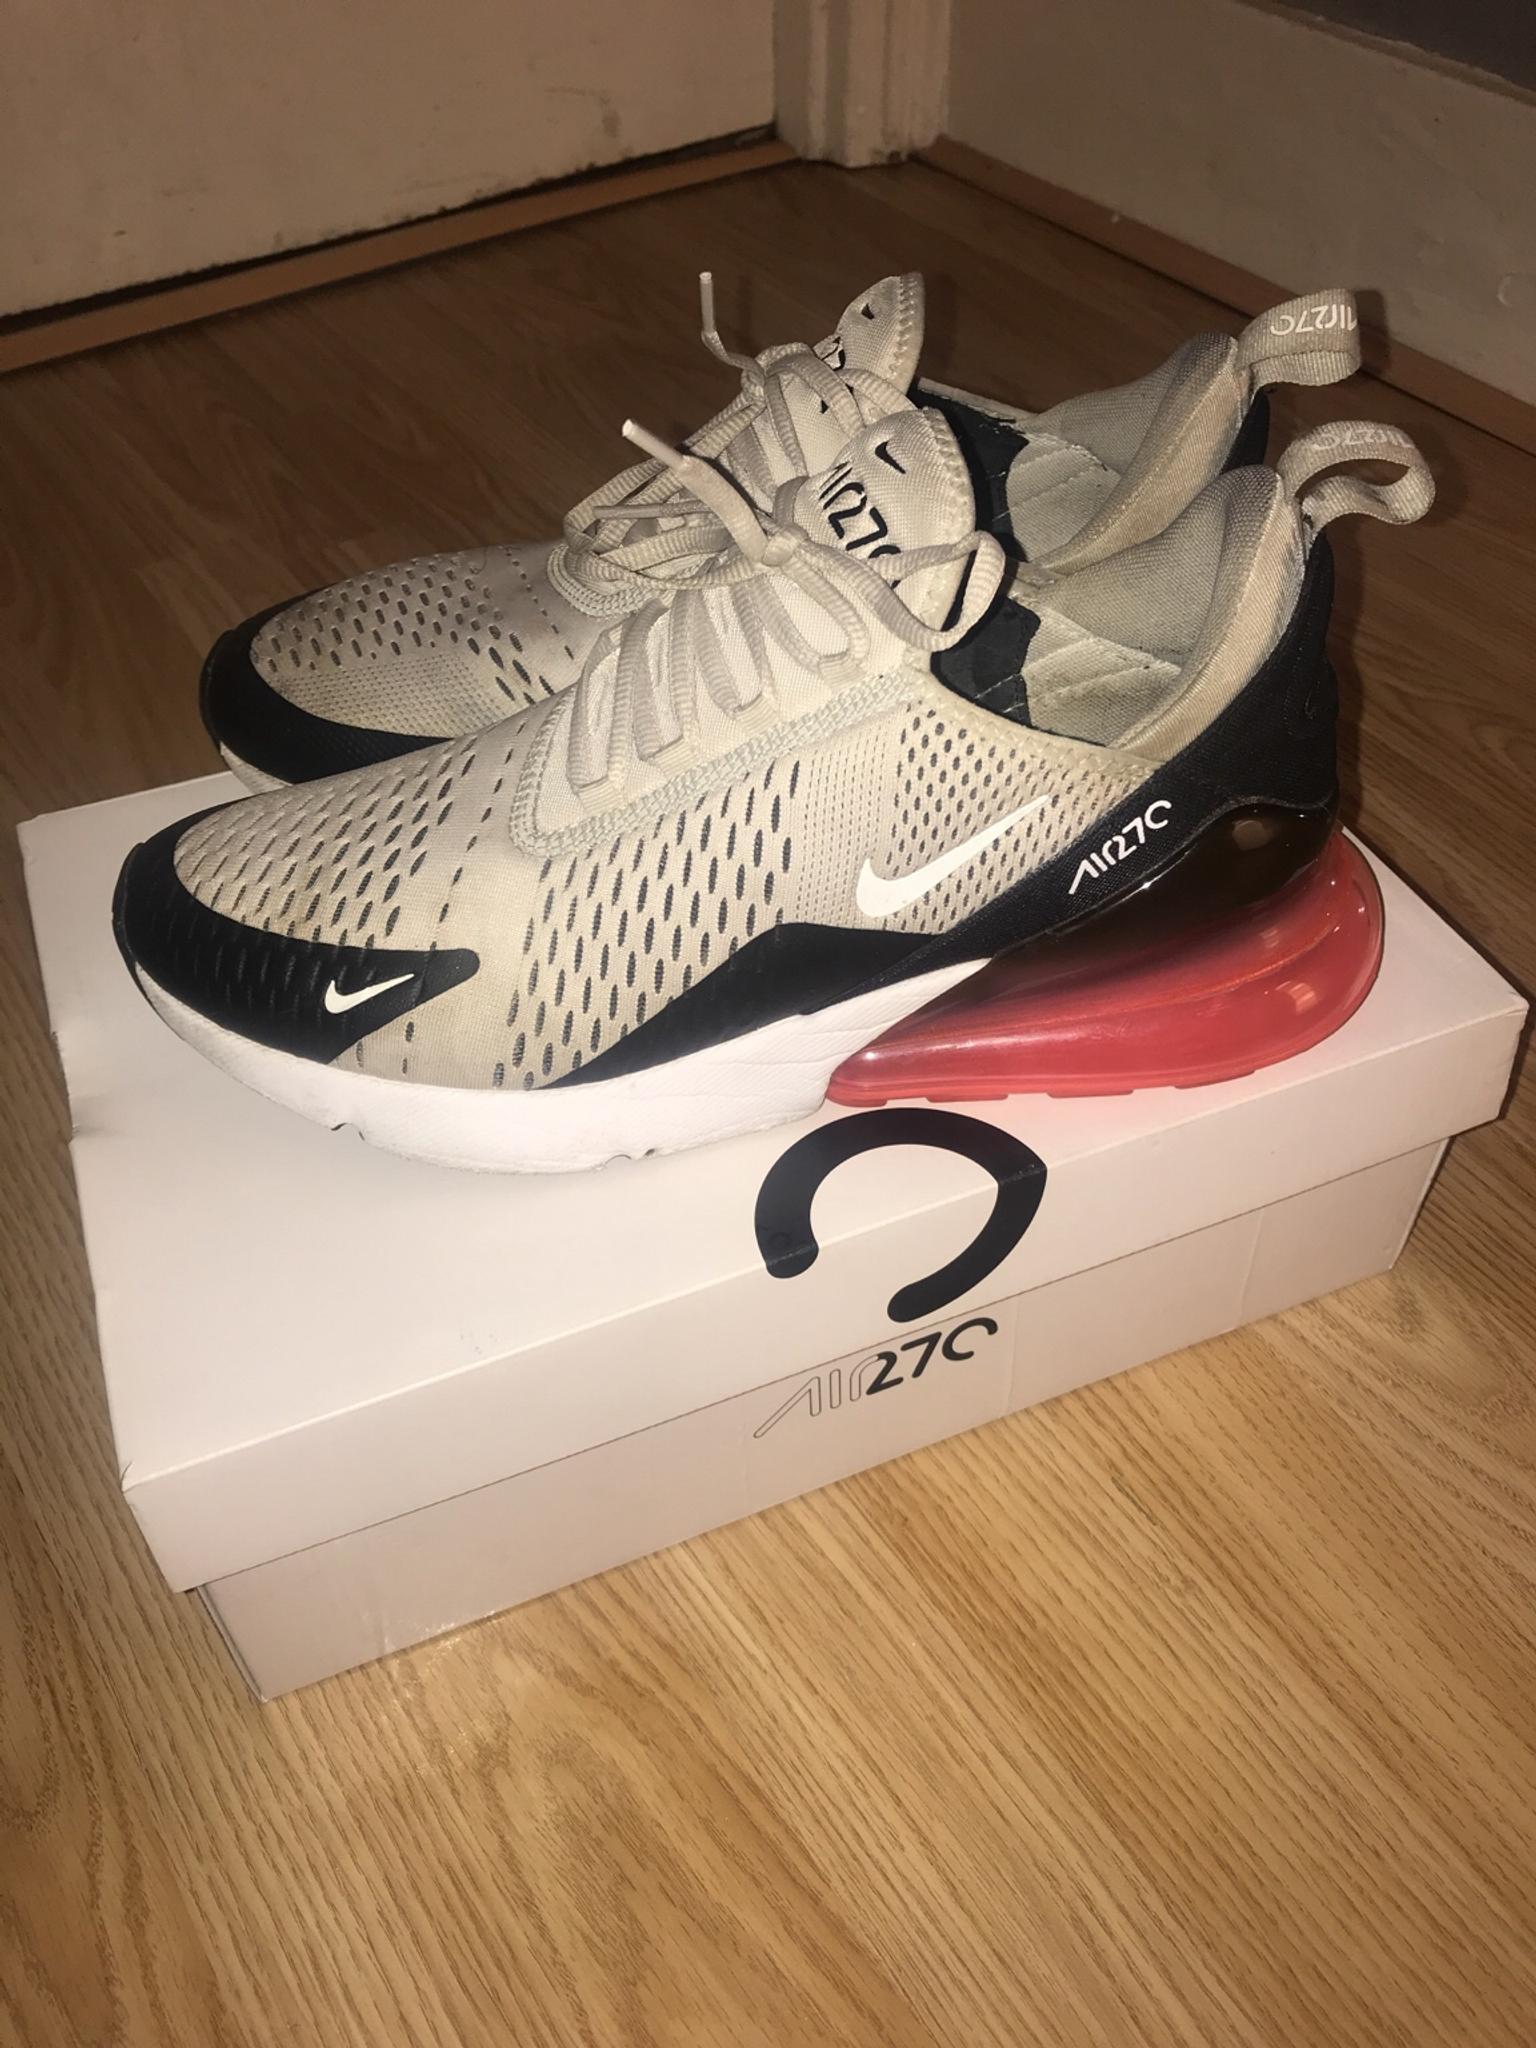 Nike Air Max 270 Black Beige Pink White In Nw10 Brent For 45 00 For Sale Shpock